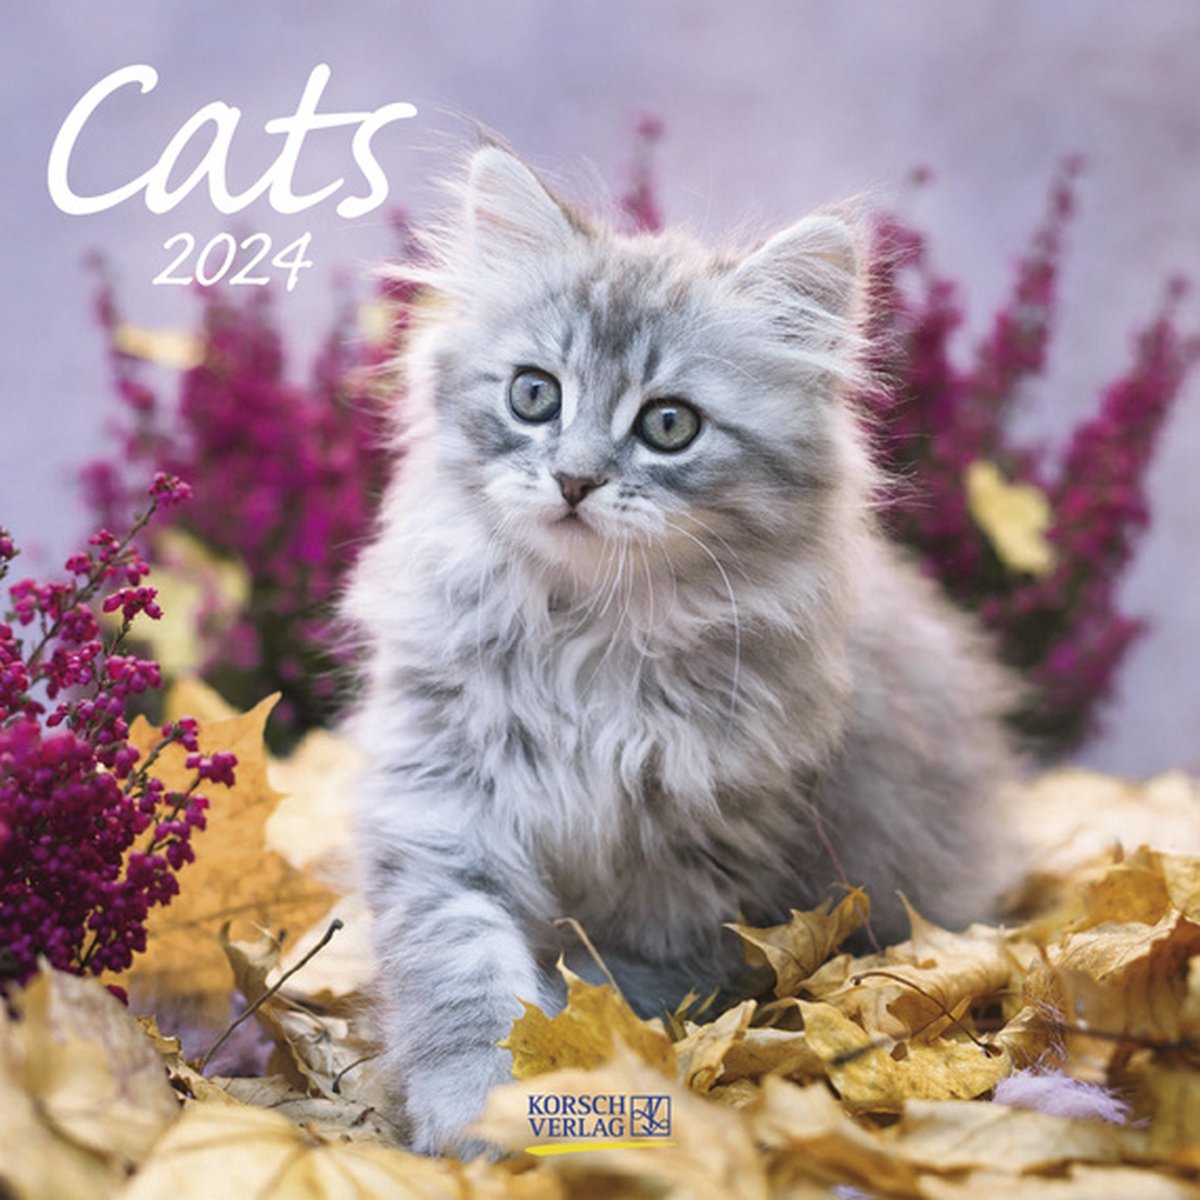 Calendrier Kitty 2024, Calendrier Chats 2024 Calendrier Mural Chat